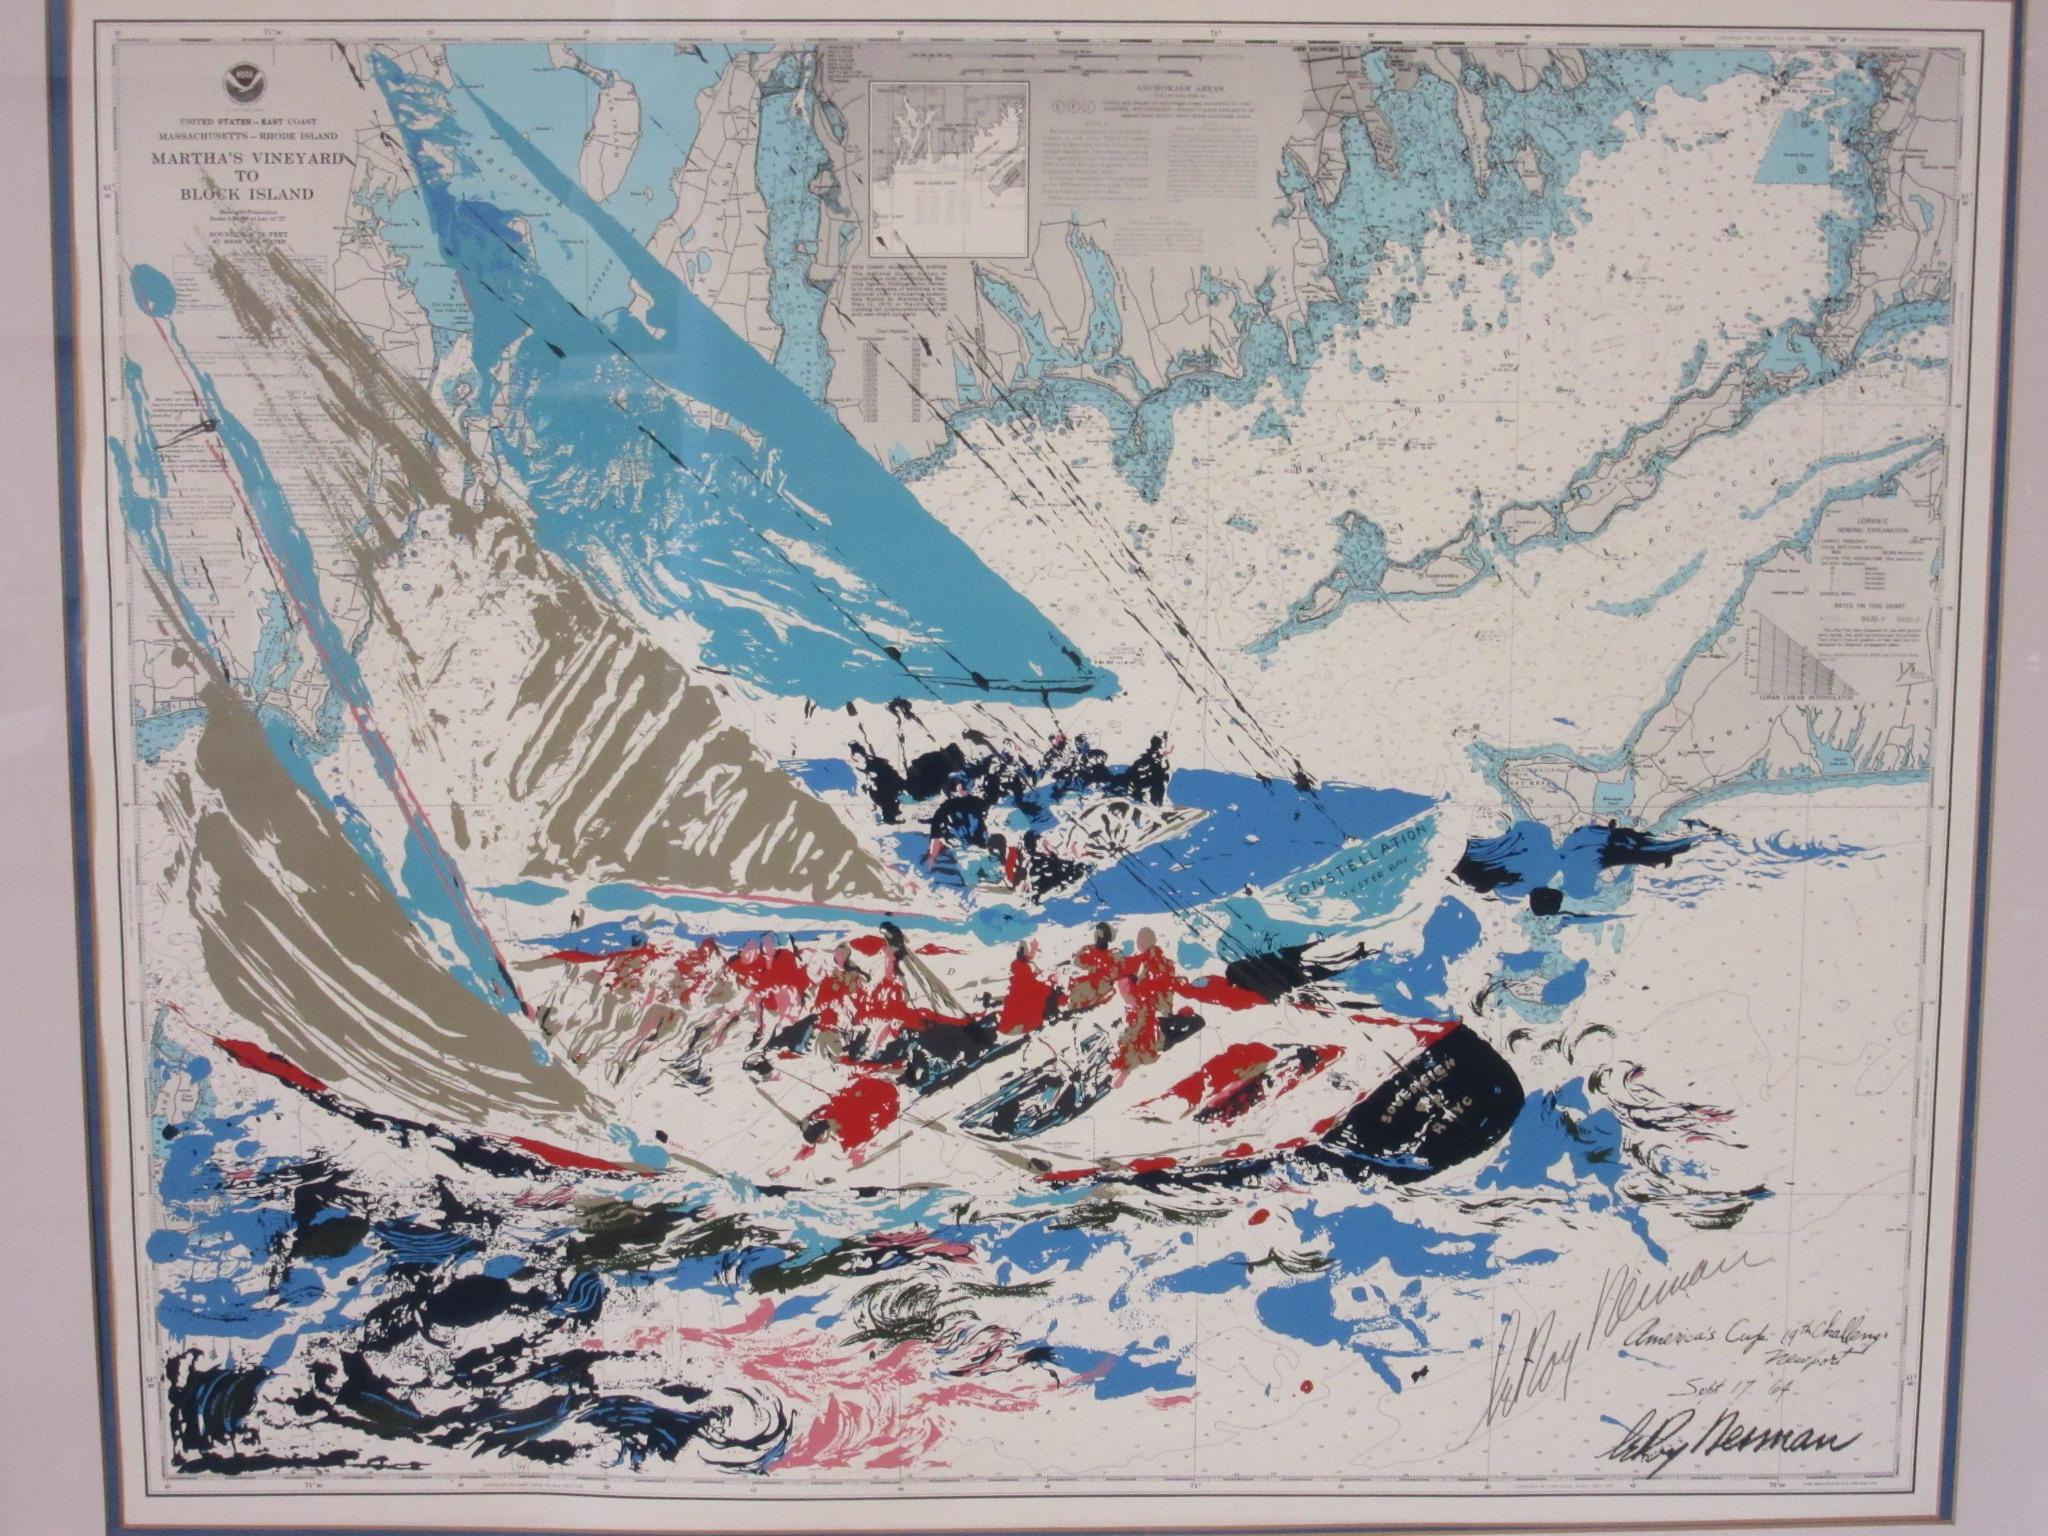 A great piece of art and yachting history by listed artist Leroy Neiman of the 1964 America's Cup race in a bright colored silkscreen print on an original NOAA oceanic map titled Martha's vineyard to Block Island. The lower right corner it has